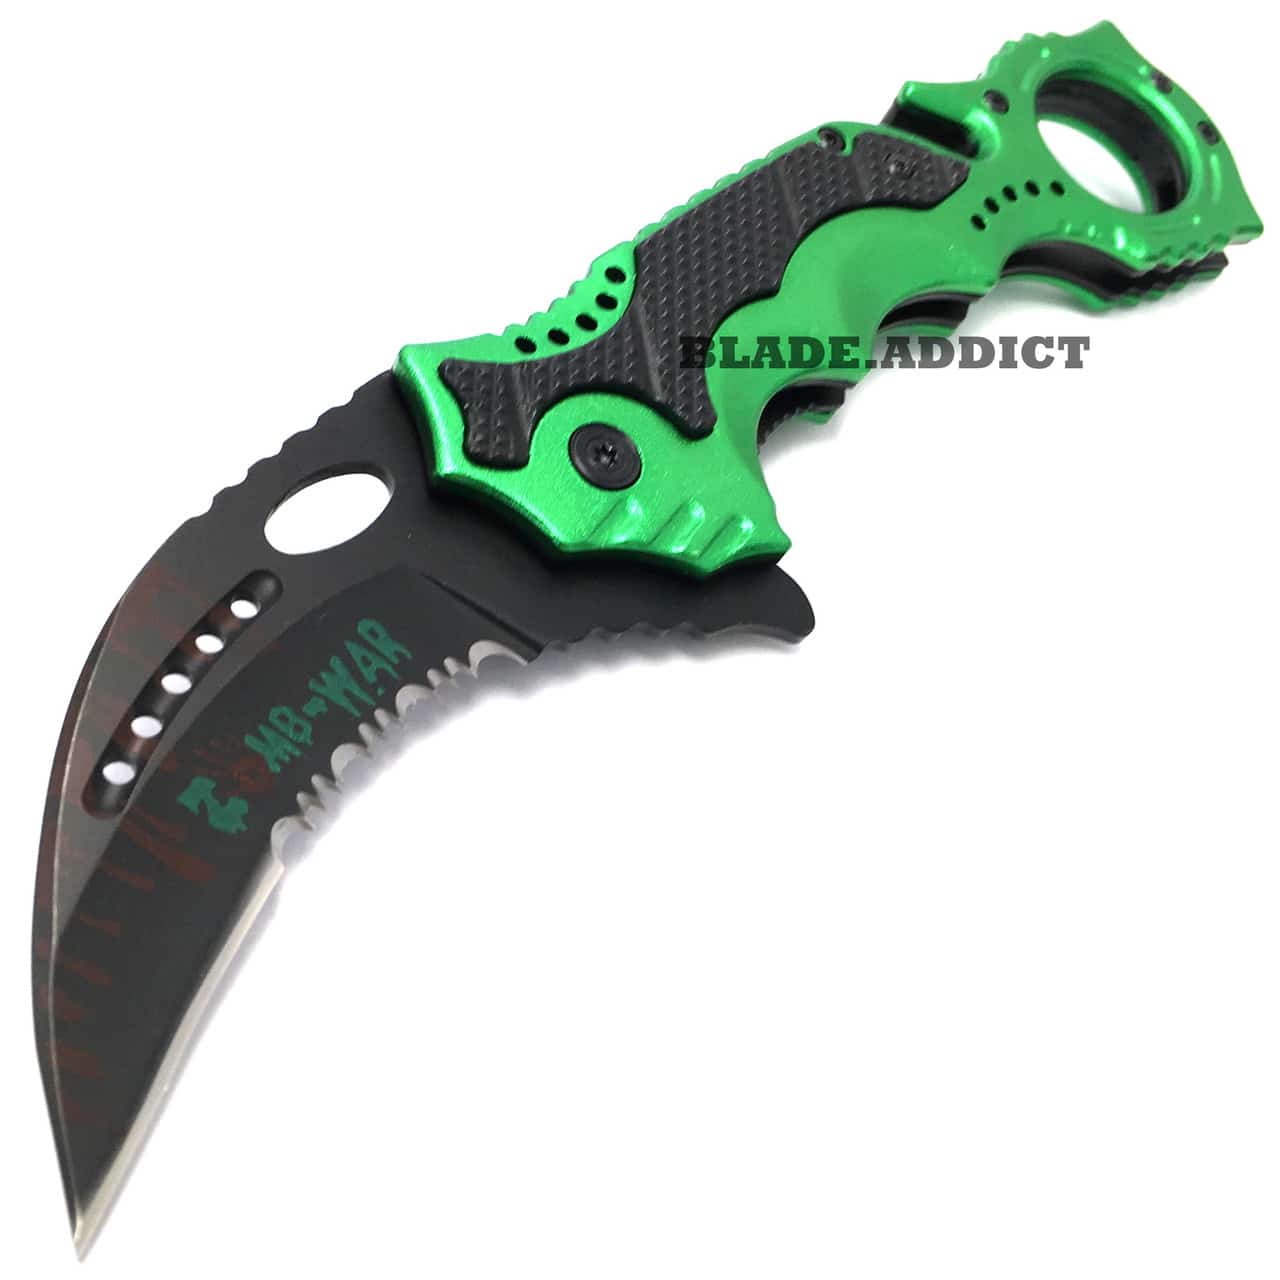 8" ZOMBIE KARAMBIT Tactical Claw Spring Assisted Pocket Knife Rescue Combat EDC